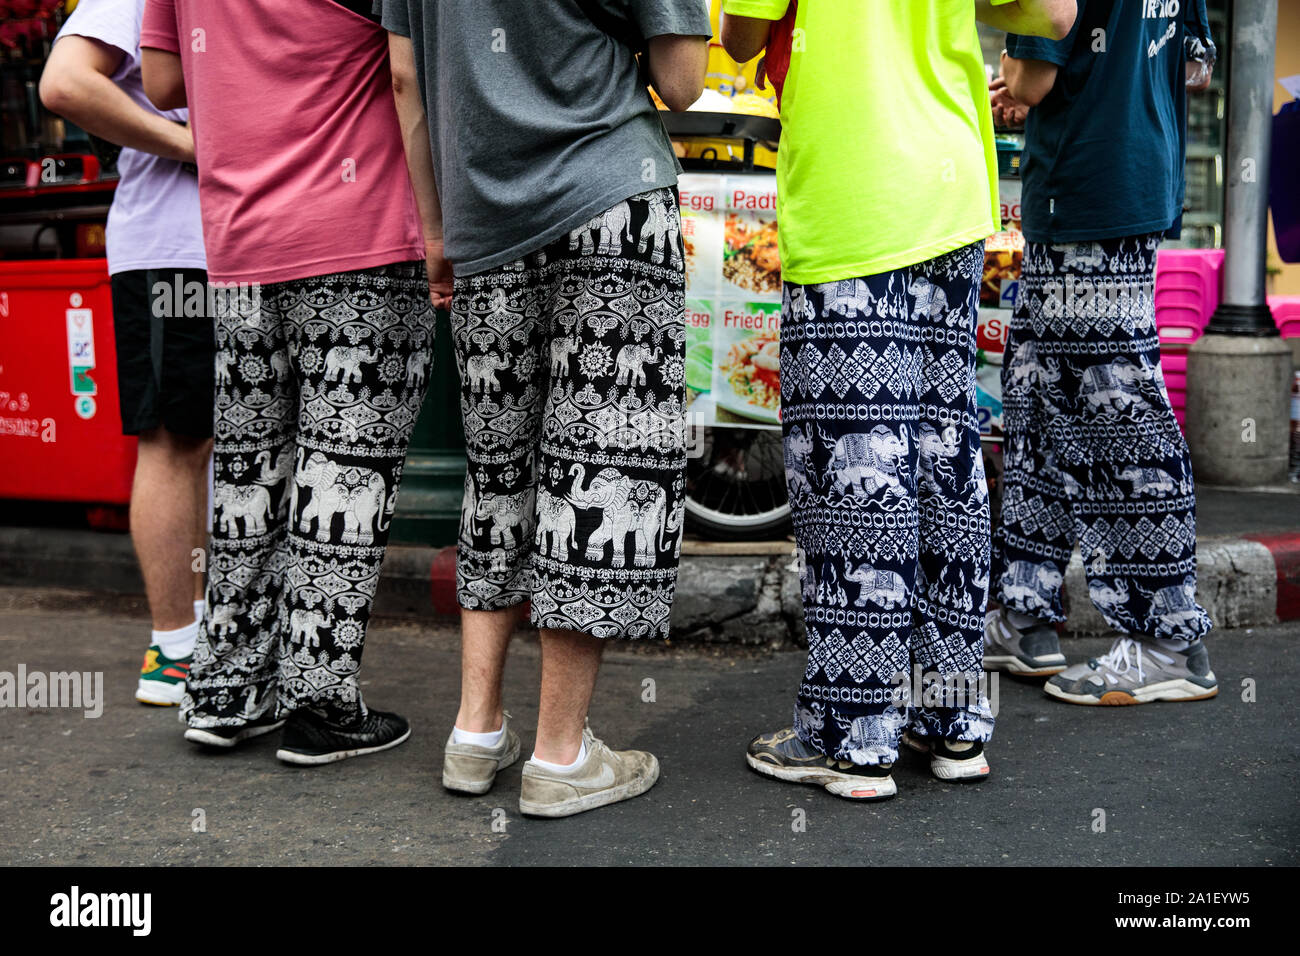 https://c8.alamy.com/comp/2A1EYW5/bangkok-thailand-tourists-wearing-elephant-adorned-trousers-order-food-at-a-stall-on-khao-san-road-in-bangkok-thailand-on-august-22nd-2019-bangkoks-bustling-khao-san-road-a-strip-famous-among-tourists-for-its-budget-hostels-street-food-and-market-stalls-is-set-for-a-128m-face-lift-in-october-this-year-for-many-backpackers-khao-san-is-the-starting-point-for-their-travels-across-southeast-asia-it-is-a-place-to-meet-fellow-travellers-dine-out-on-pad-thai-served-from-street-carts-sip-cocktails-from-small-brightly-coloured-buckets-or-perhaps-get-an-ill-advised-tattoo-a-place-b-2A1EYW5.jpg